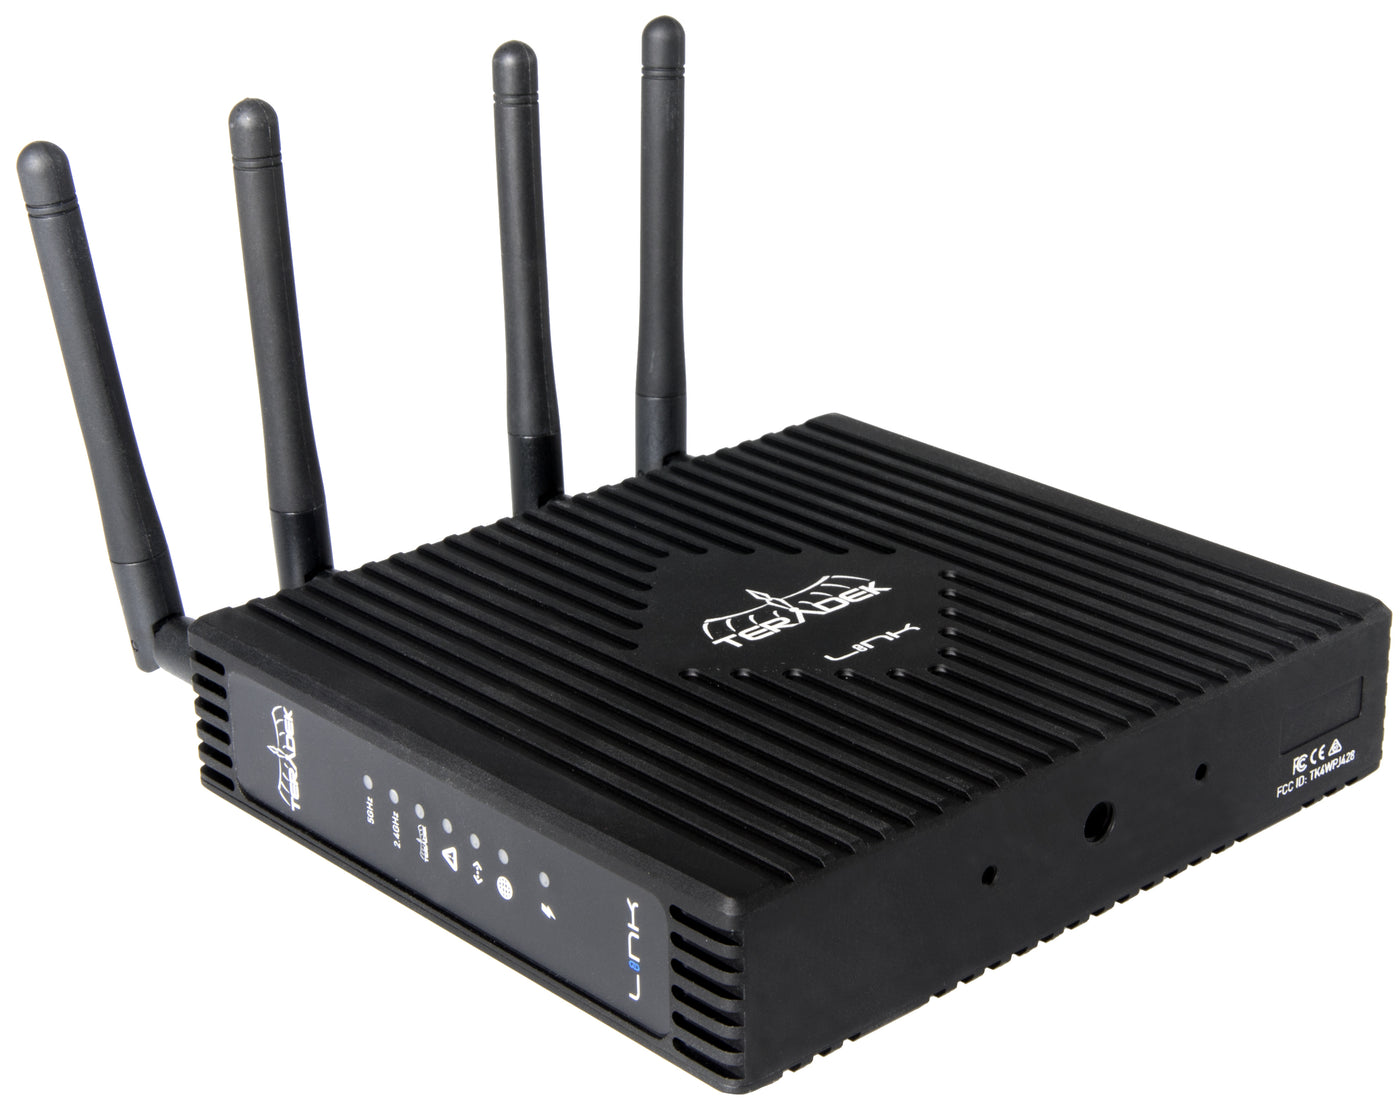 Teradek Link Dual Band Wireless Access Point / Router